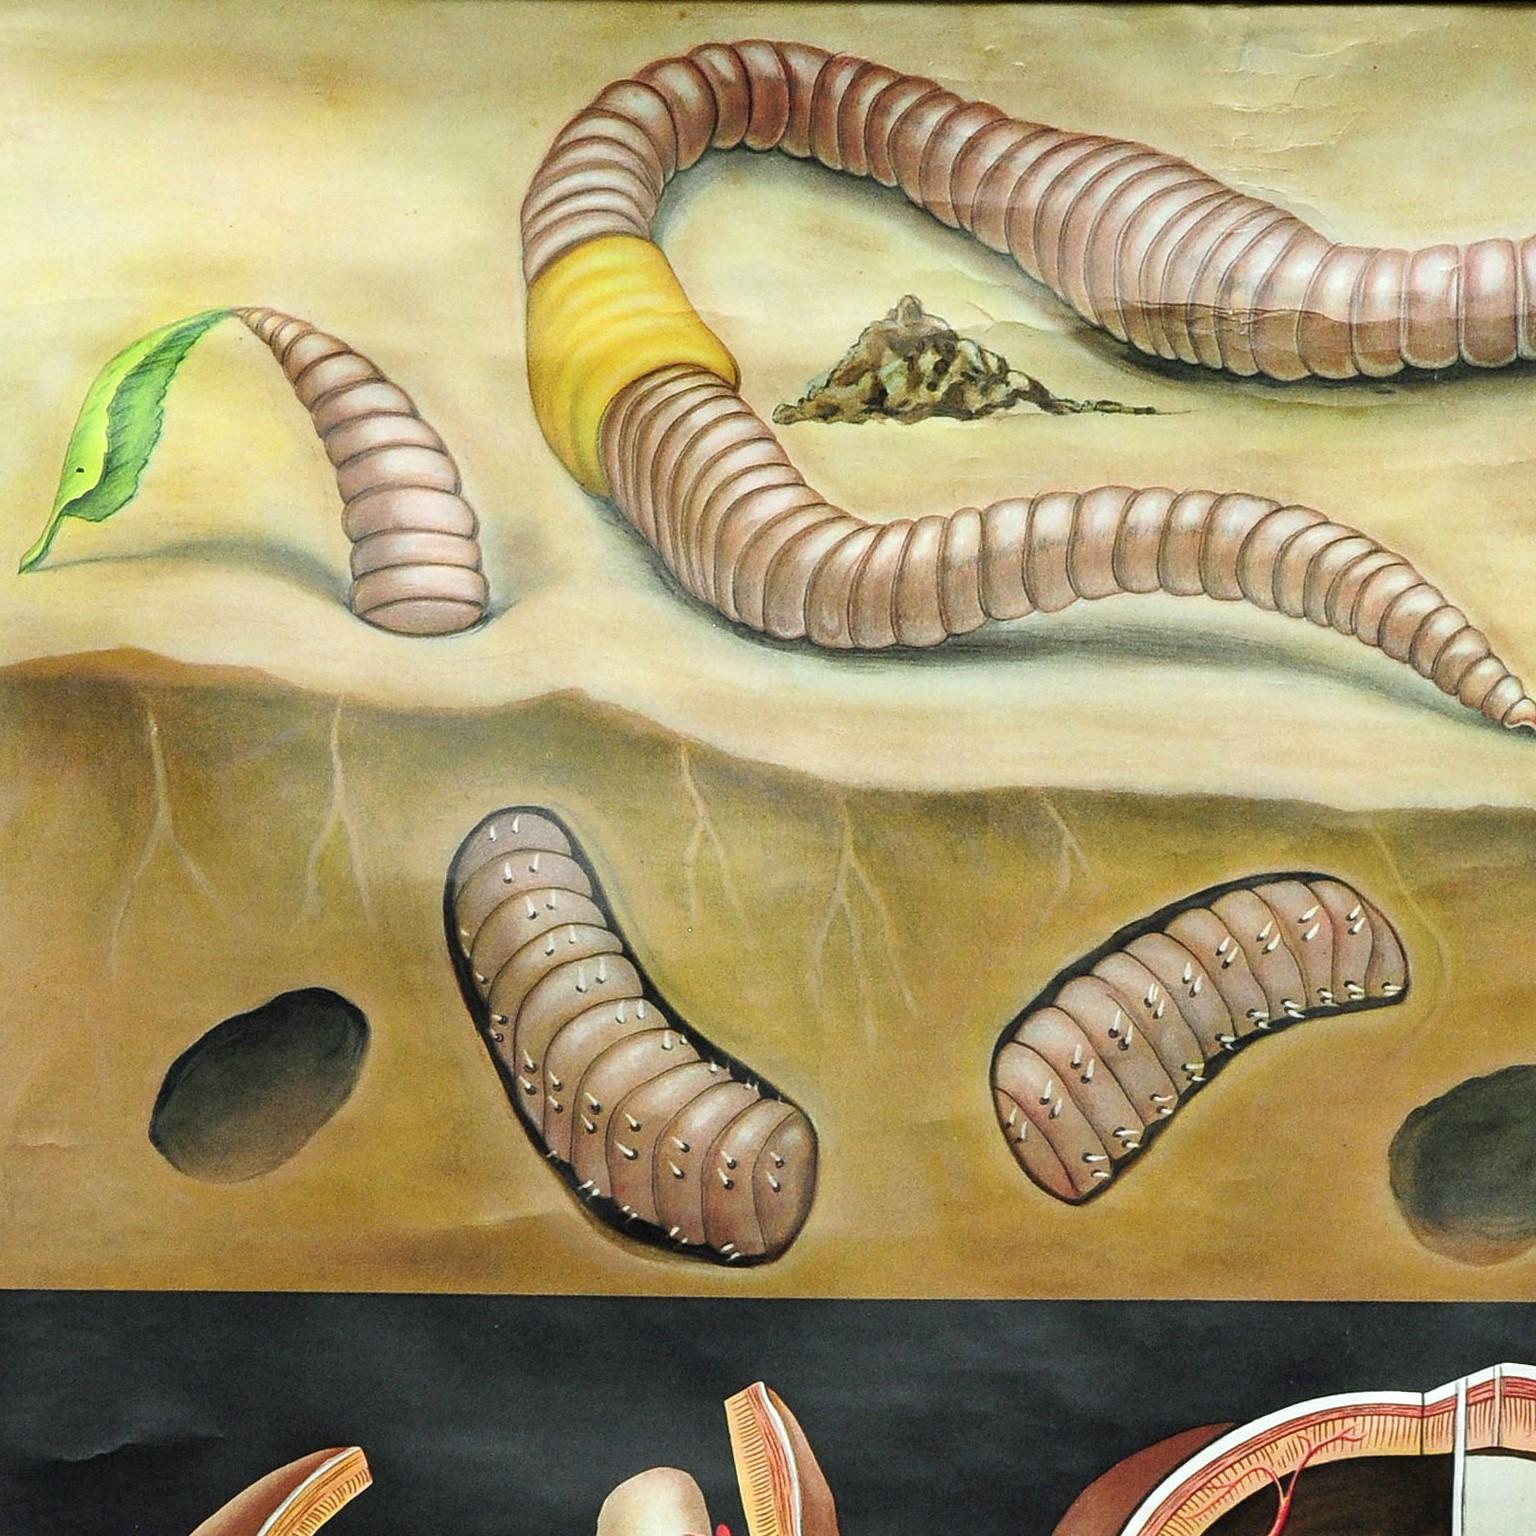 A naturalistic pull-down vintage wall chart by the artists Jung-Koch-Quentell depicting the cute earthworm. Used as teaching material in German schools. Colorful print on paper reinforced with canvas. Published by Hagemann,